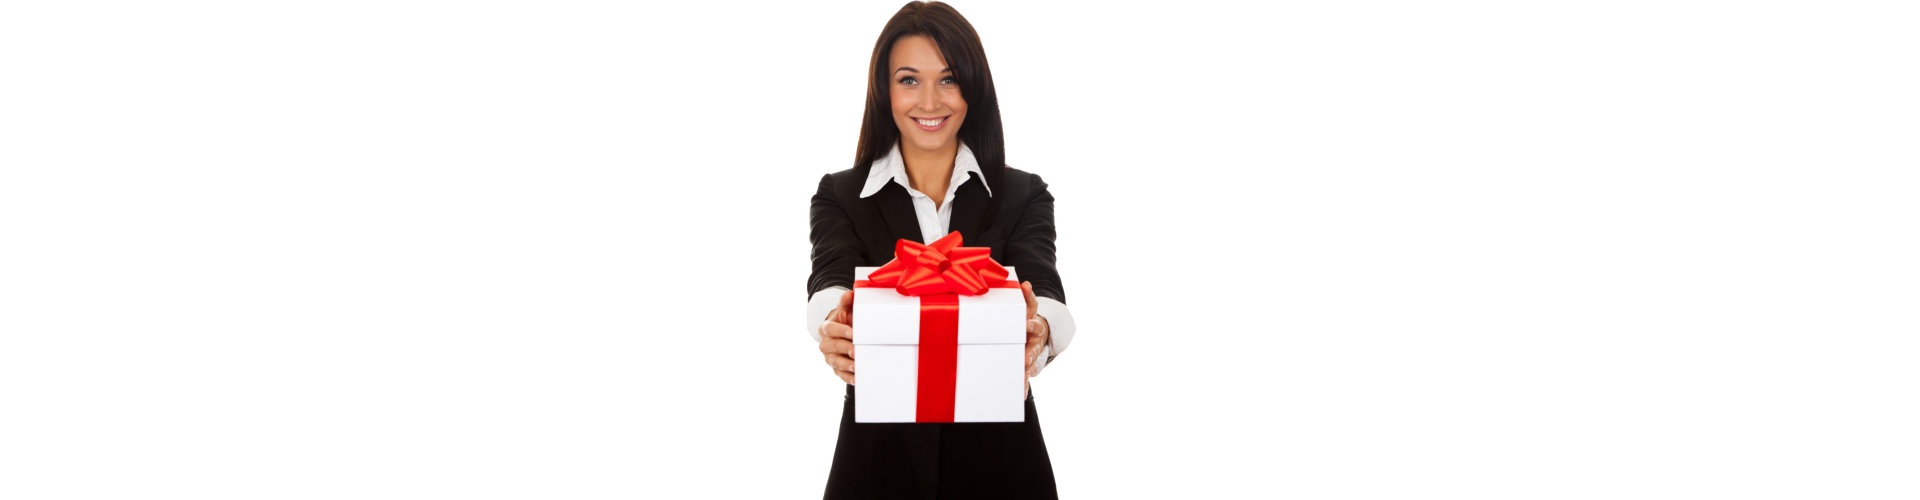 woman holding out gift box